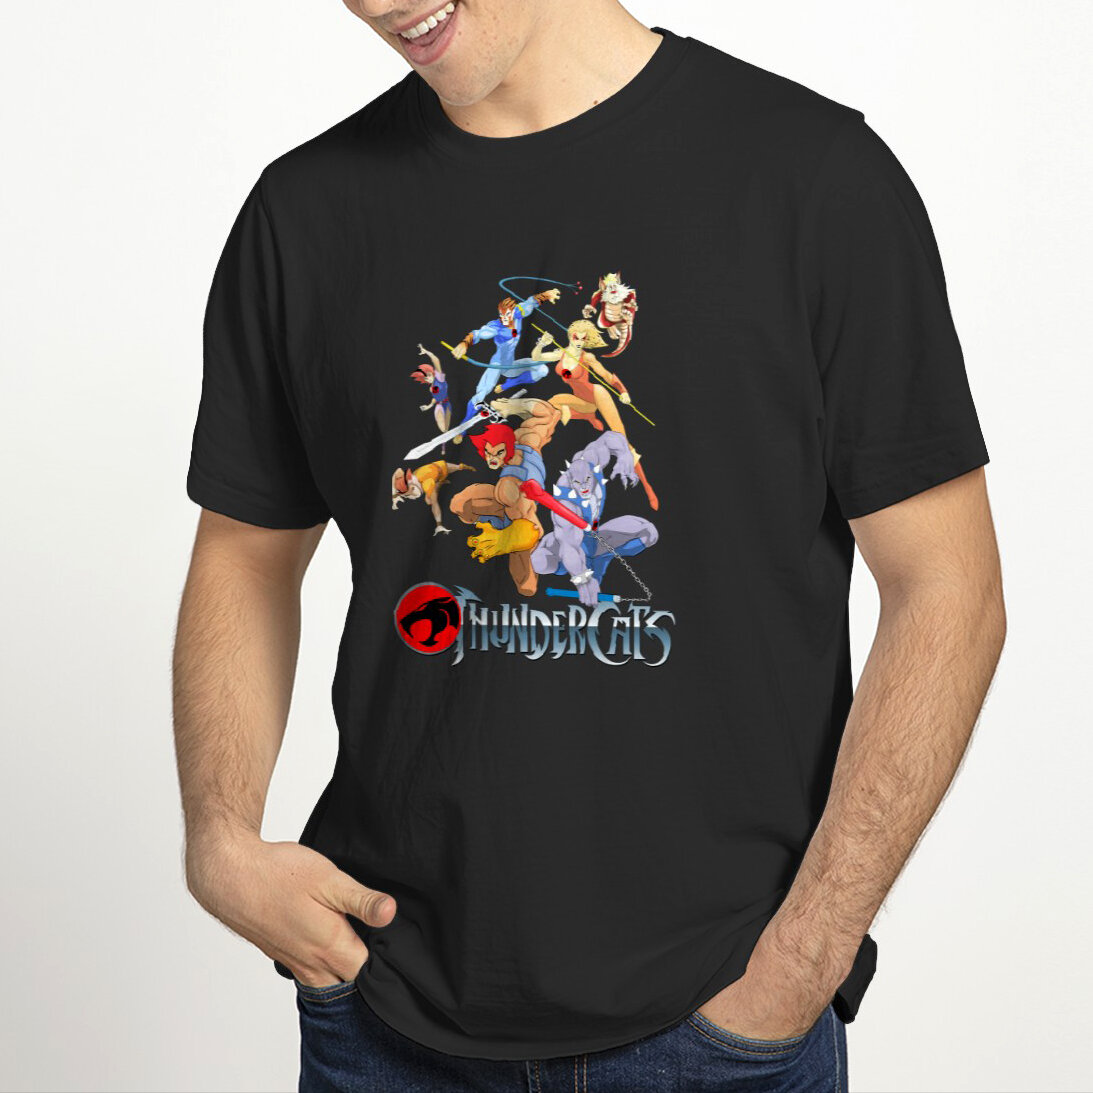 Get this Rad &quot;ThunderCats Team&quot; t-shirt! For sale now!! 
Follow this link to get yours!
https://printerval.com/thundercats-team-t-shirts-p12590203
#thundercats #classicanime #80cartoons #cooldojo #80sbaby